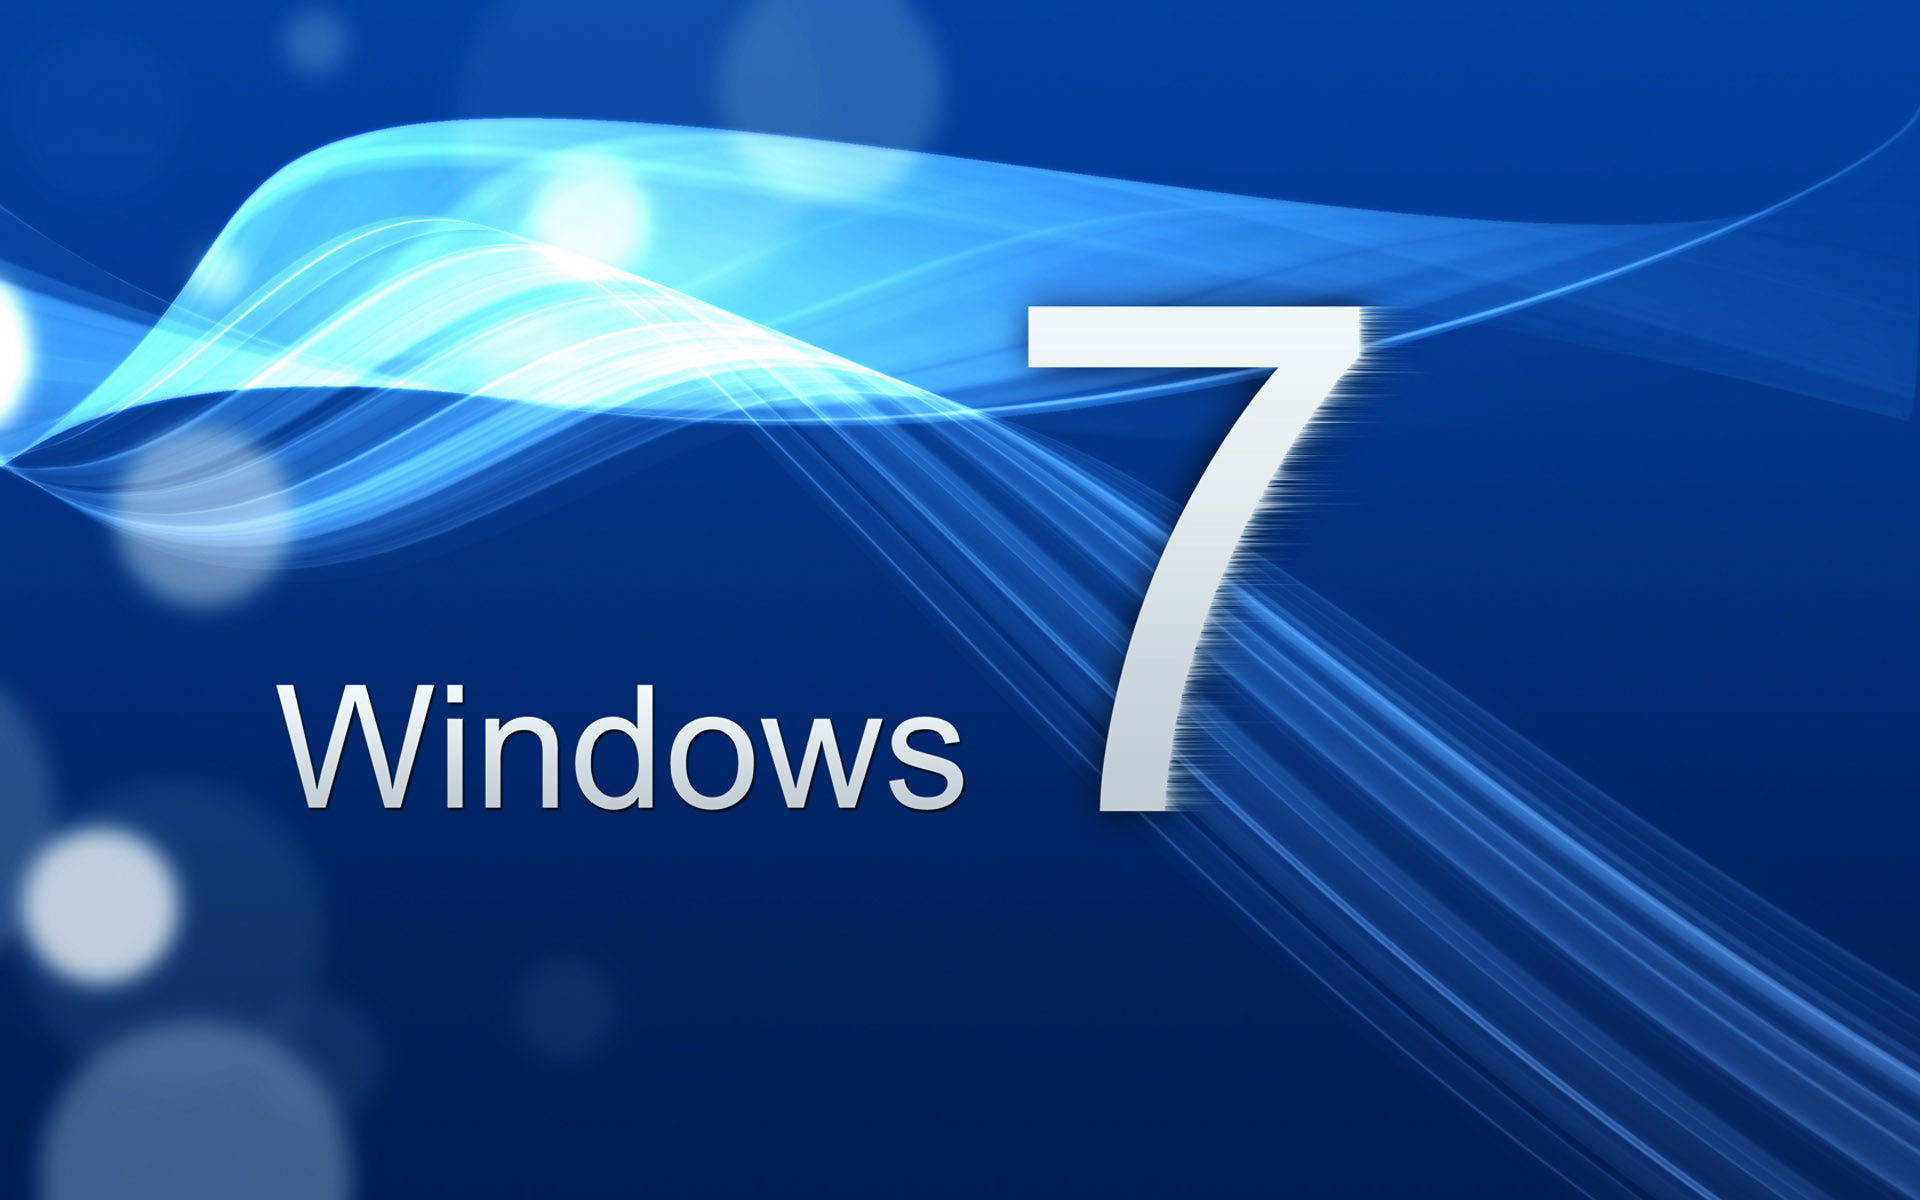 Free Windows 7 Backgrounds Themes